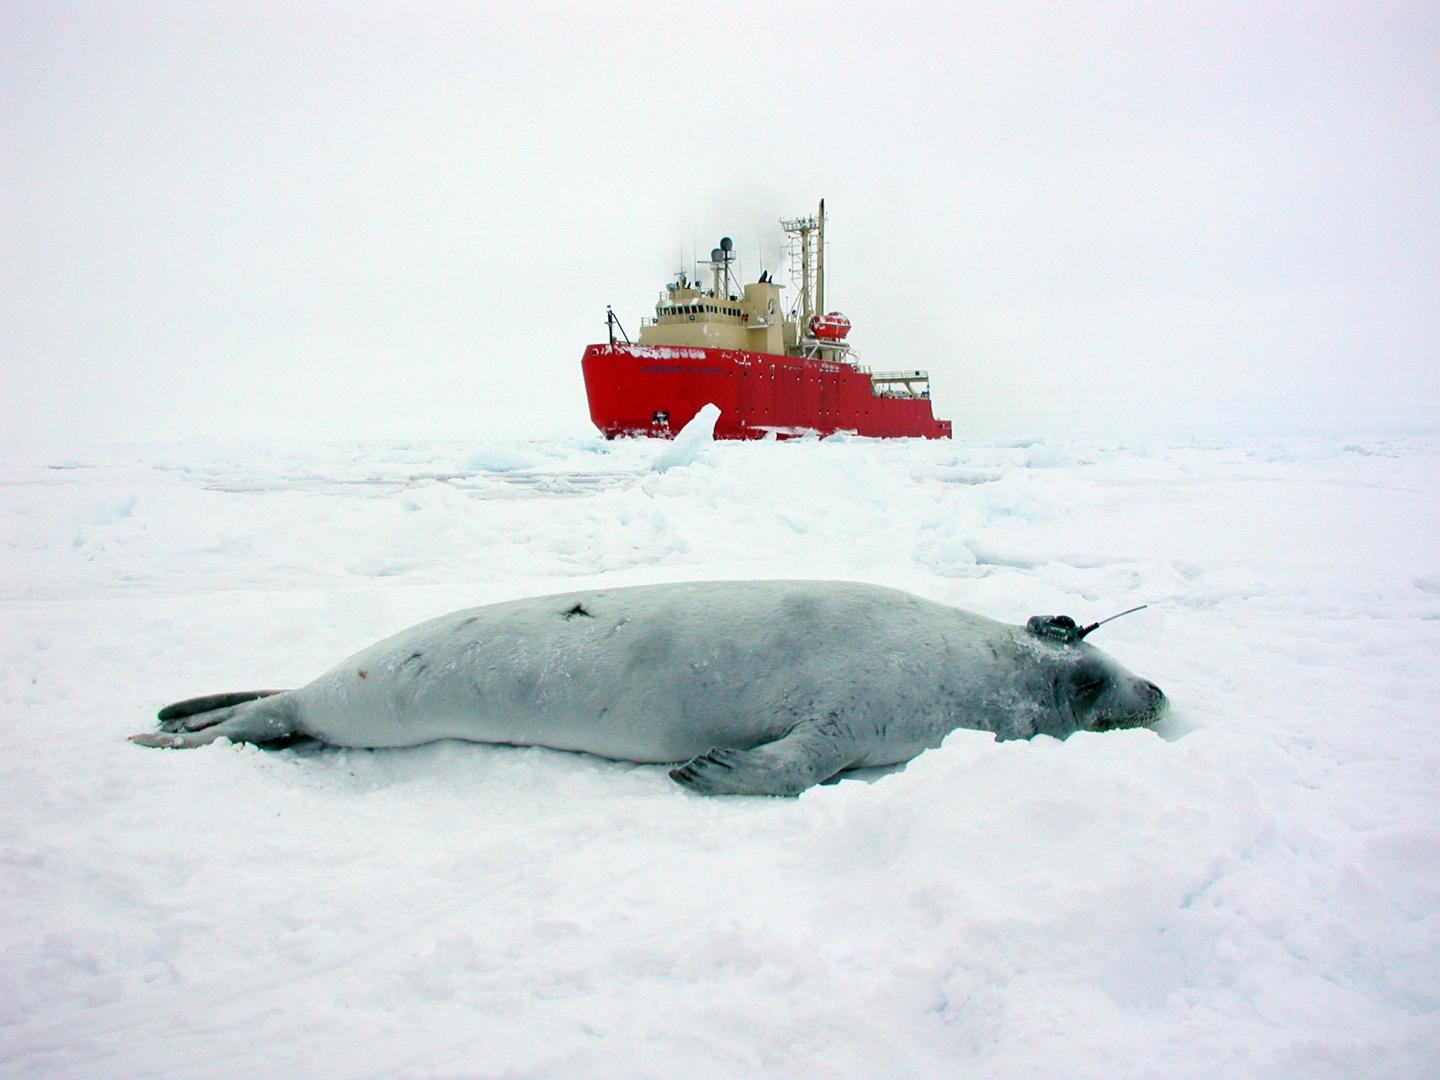 Crabeater seal with tag